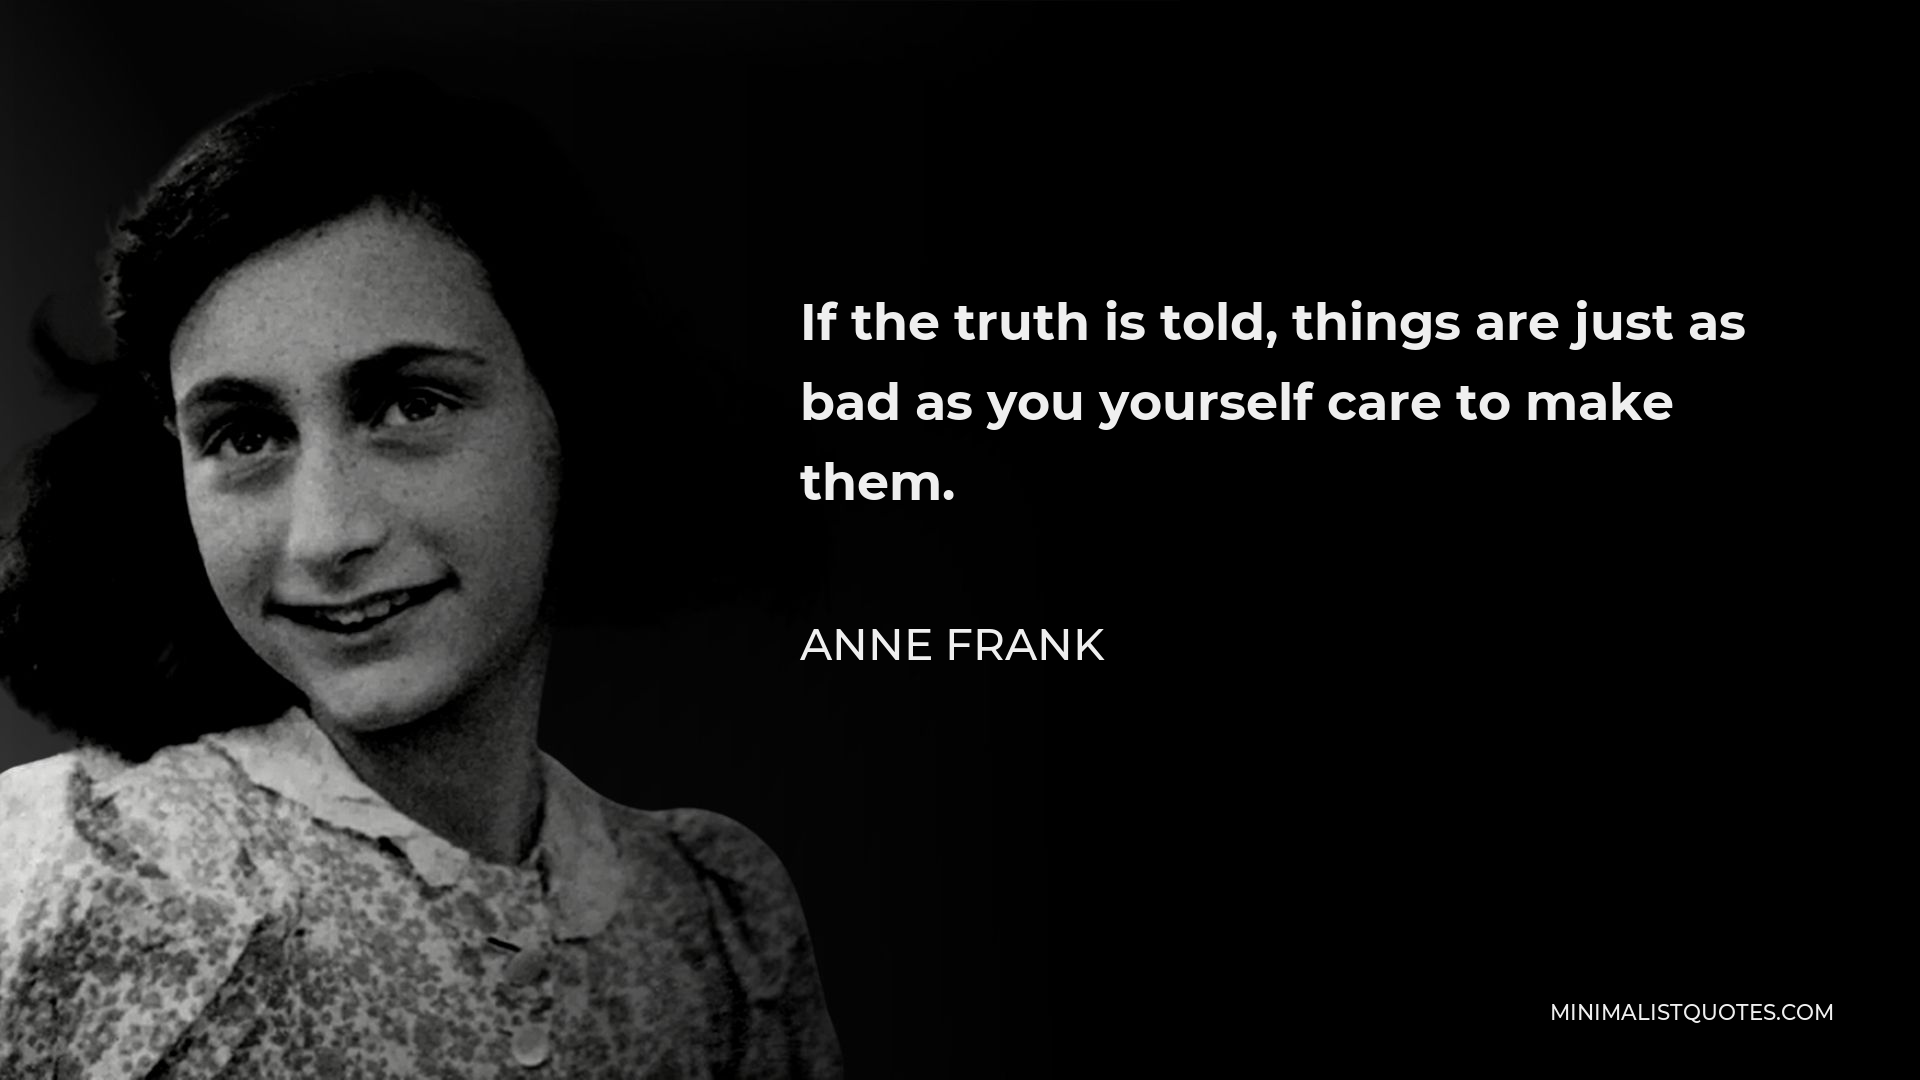 Anne Frank Quote - If the truth is told, things are just as bad as you yourself care to make them.